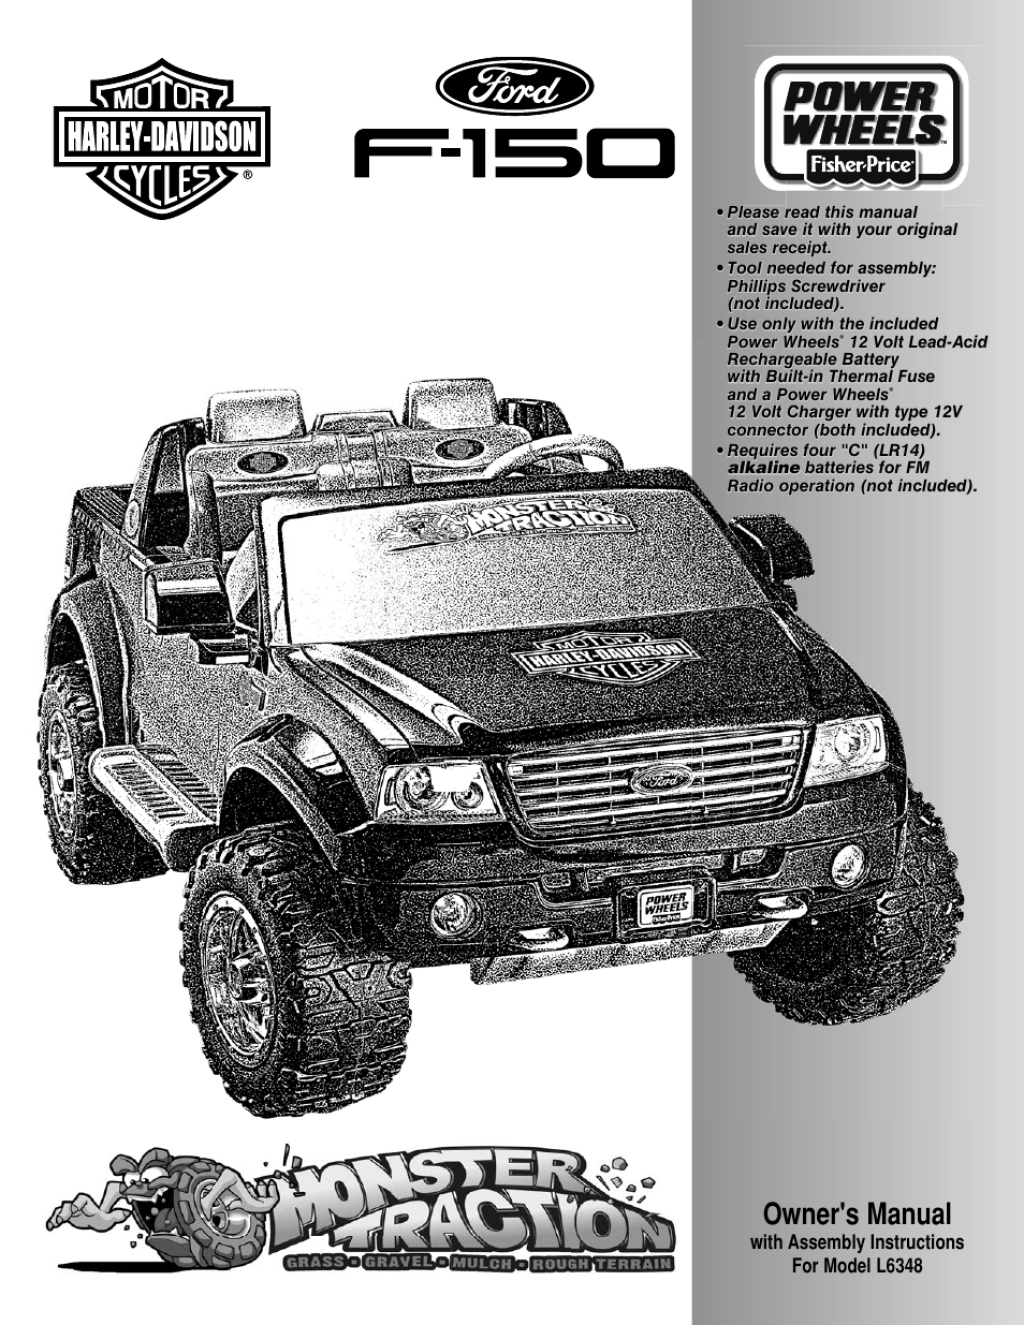 Picture of: Harley-Davidson FORD F- L User Manual   pages